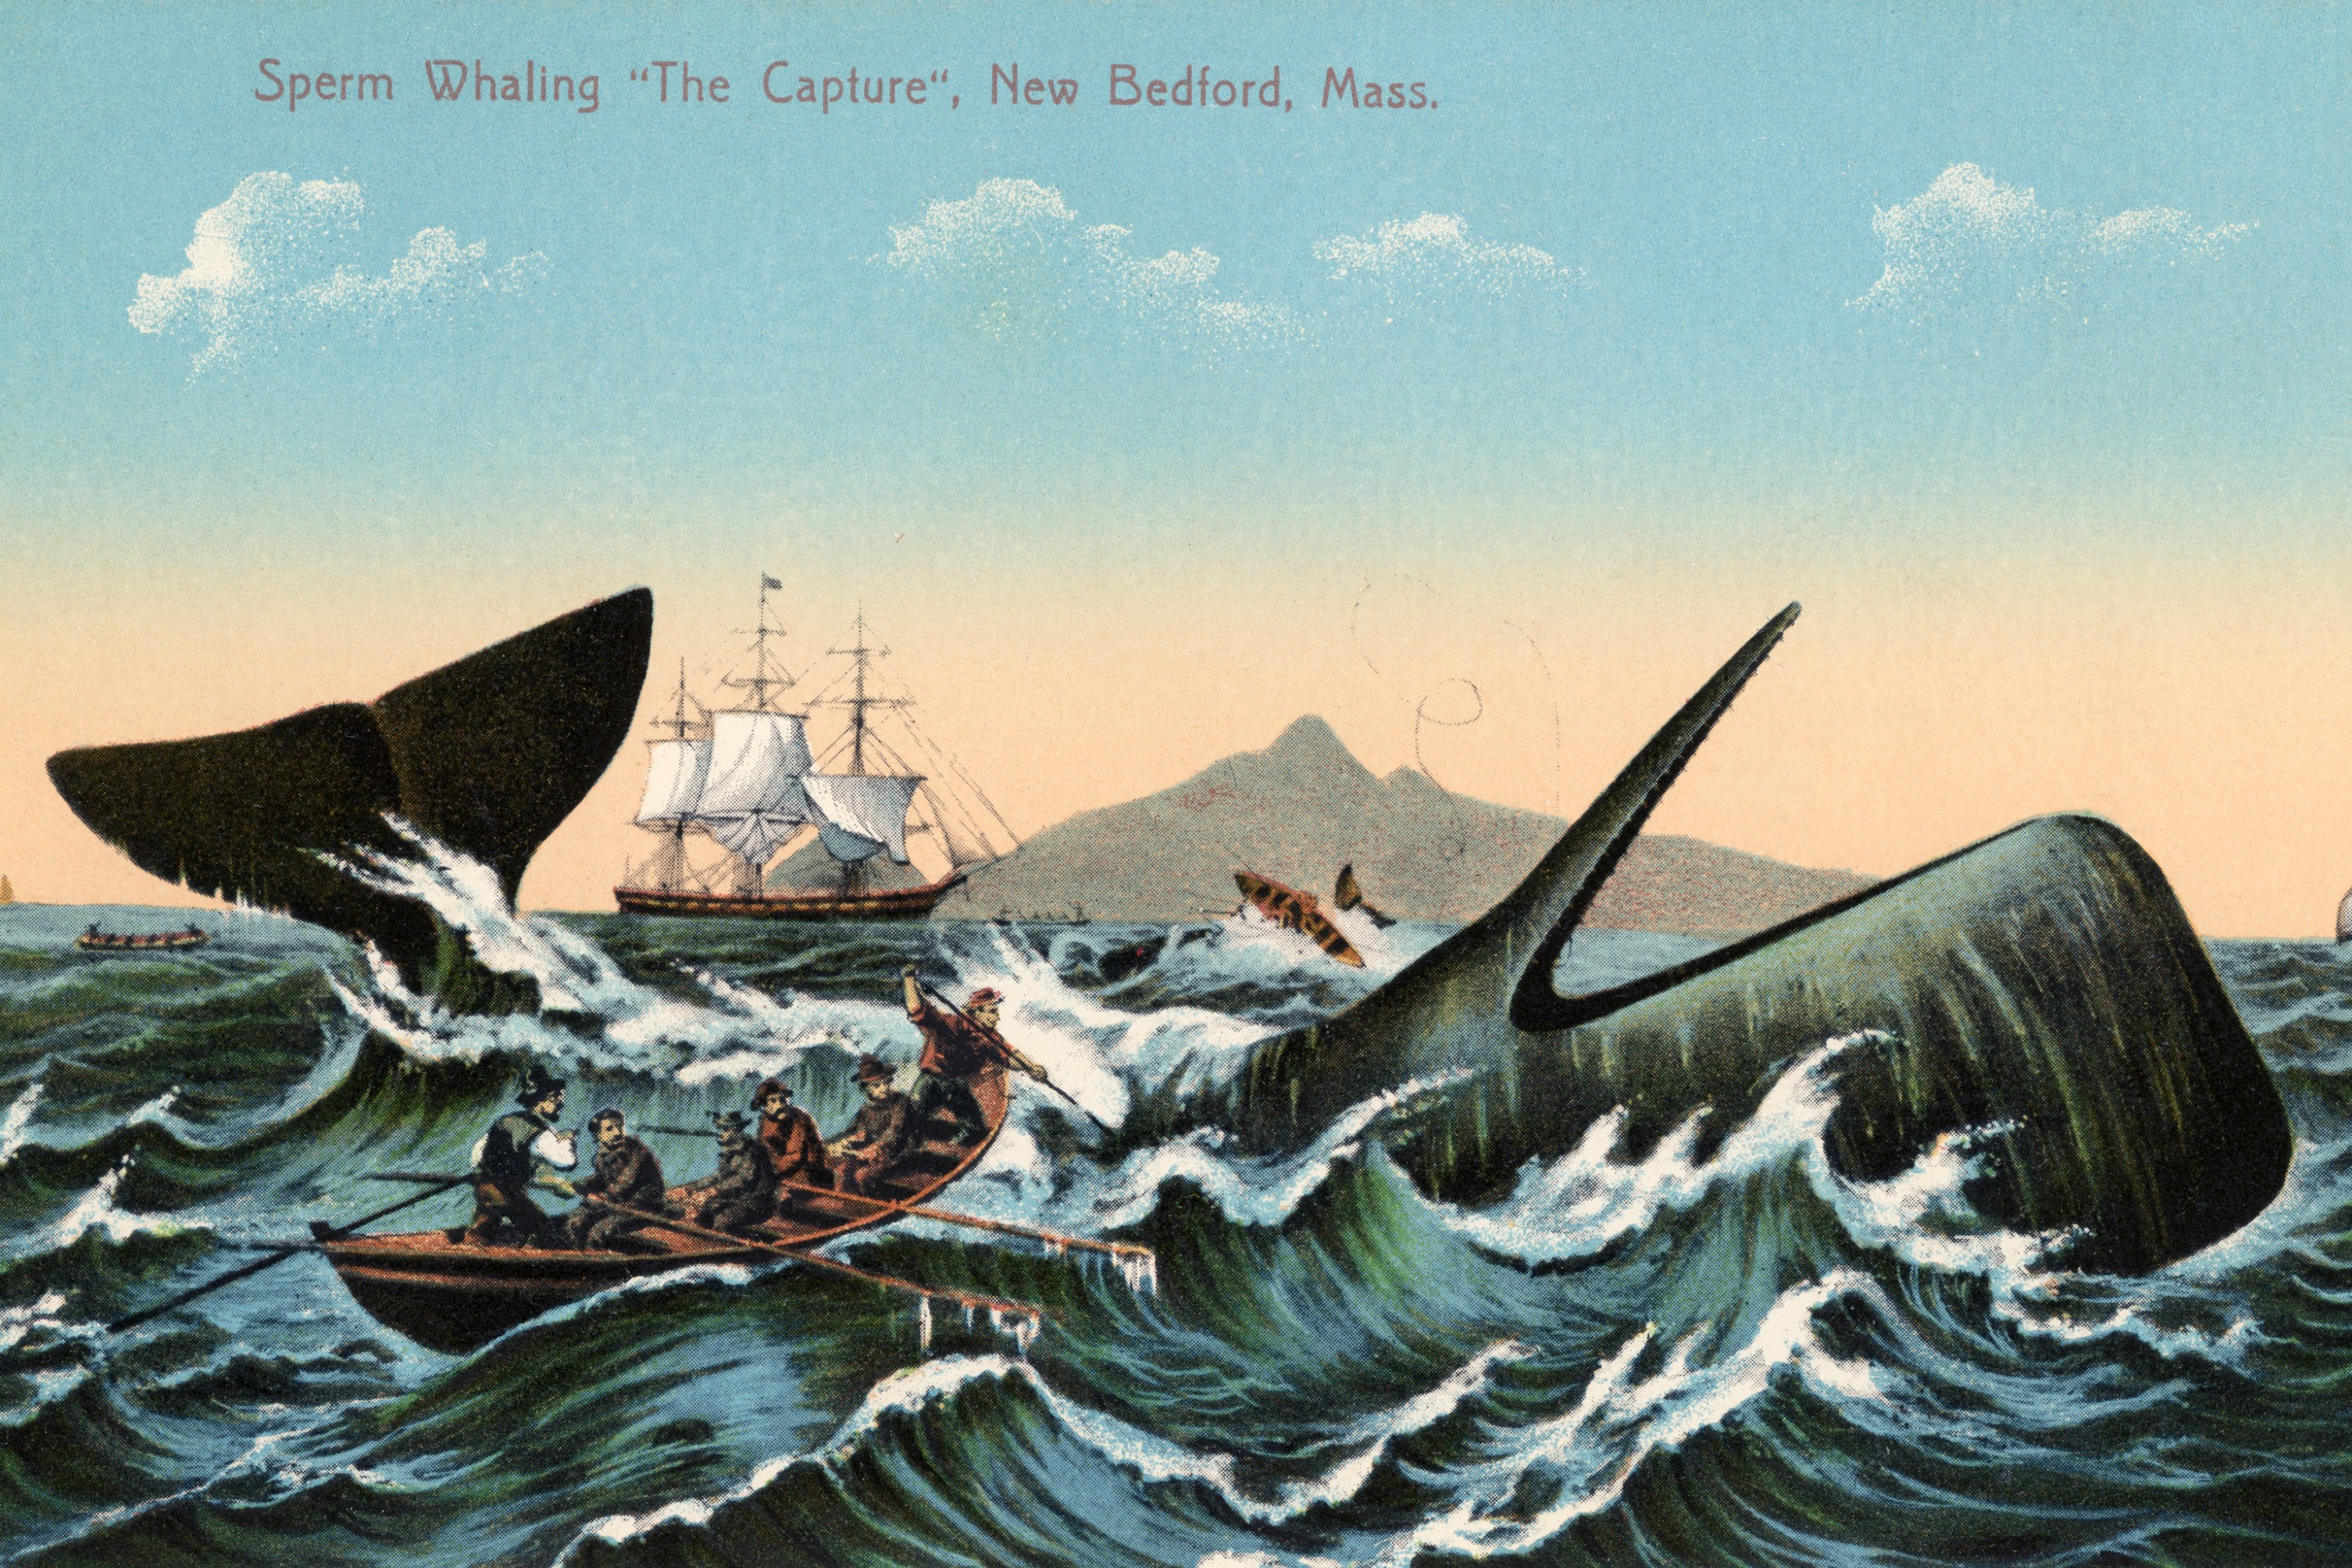 Antique print of whalers harpooning a sperm whale off New Bedford, Massachusetts. The print is from 1910.